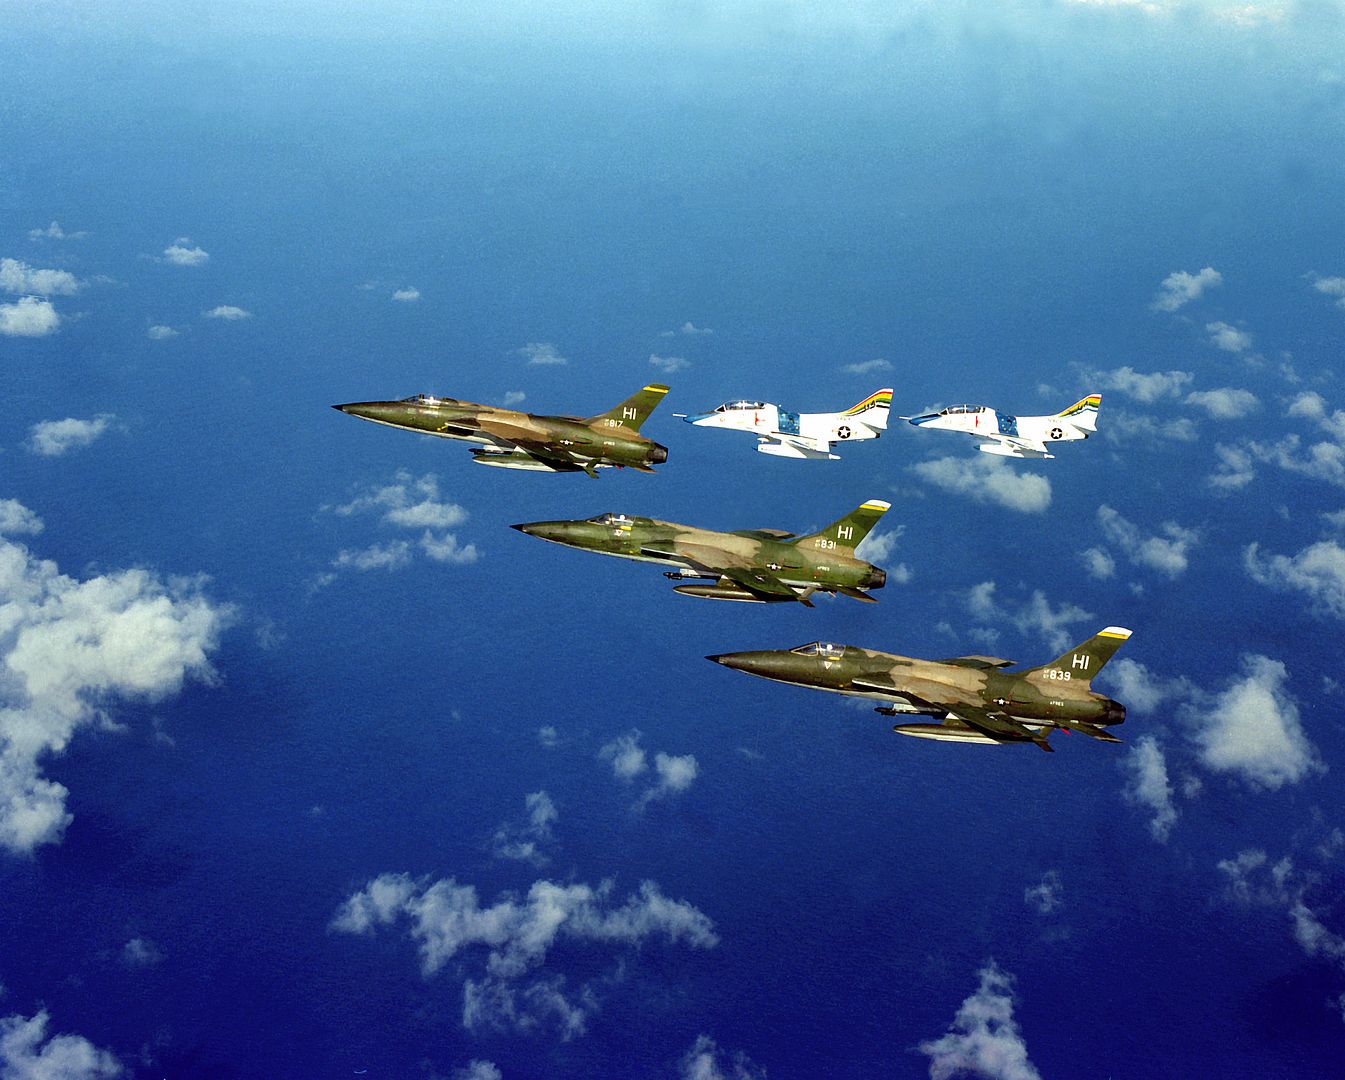 4J Skyhawk Aircraft From Fleet Composite Squadron 1 Flying In Formation